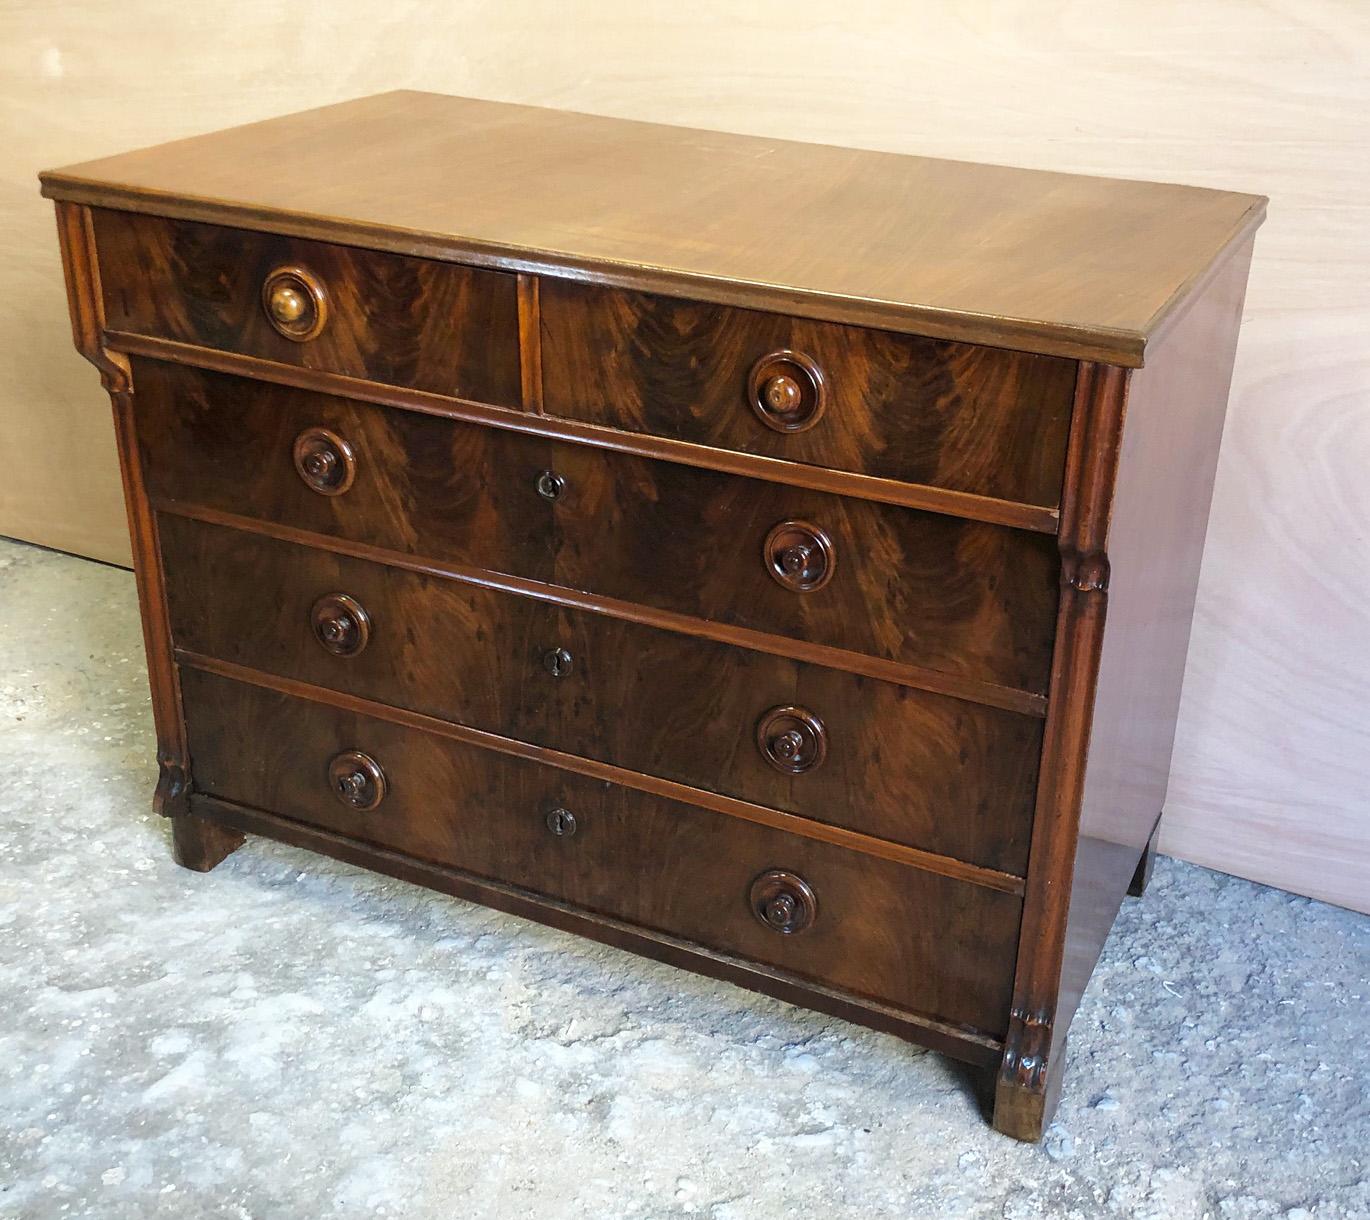 1930 Chest of Drawers in Italian Walnut Original 5 Drawers Honey Color 1